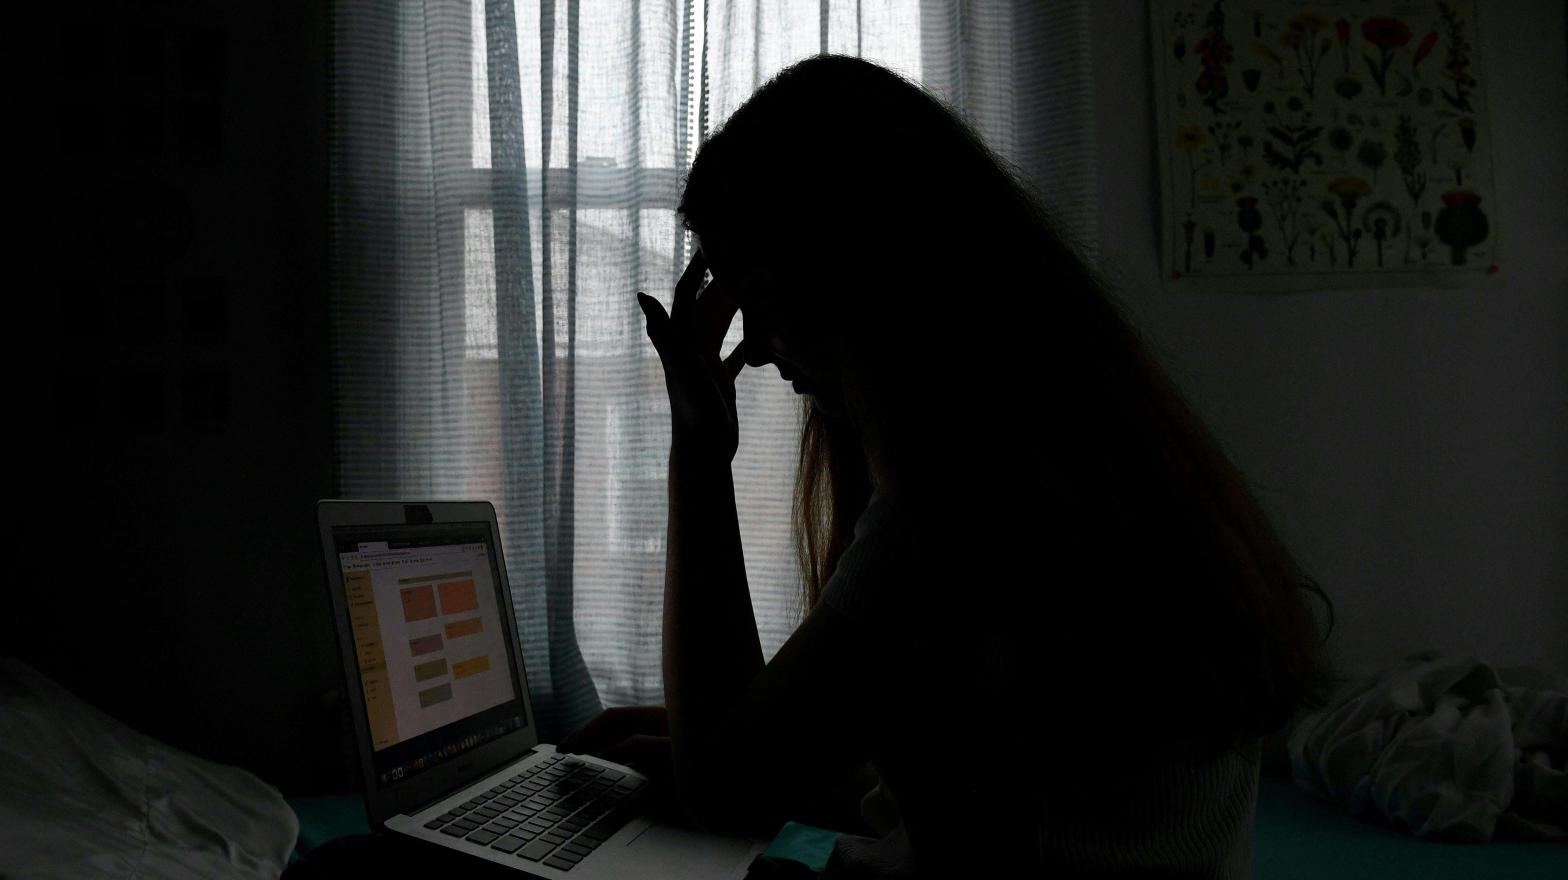 1 in 5 adults reported dealing with a mental illness in 2020 according to the National Institute on Mental Health.  (Image: Olivier Douliery, Getty Images)